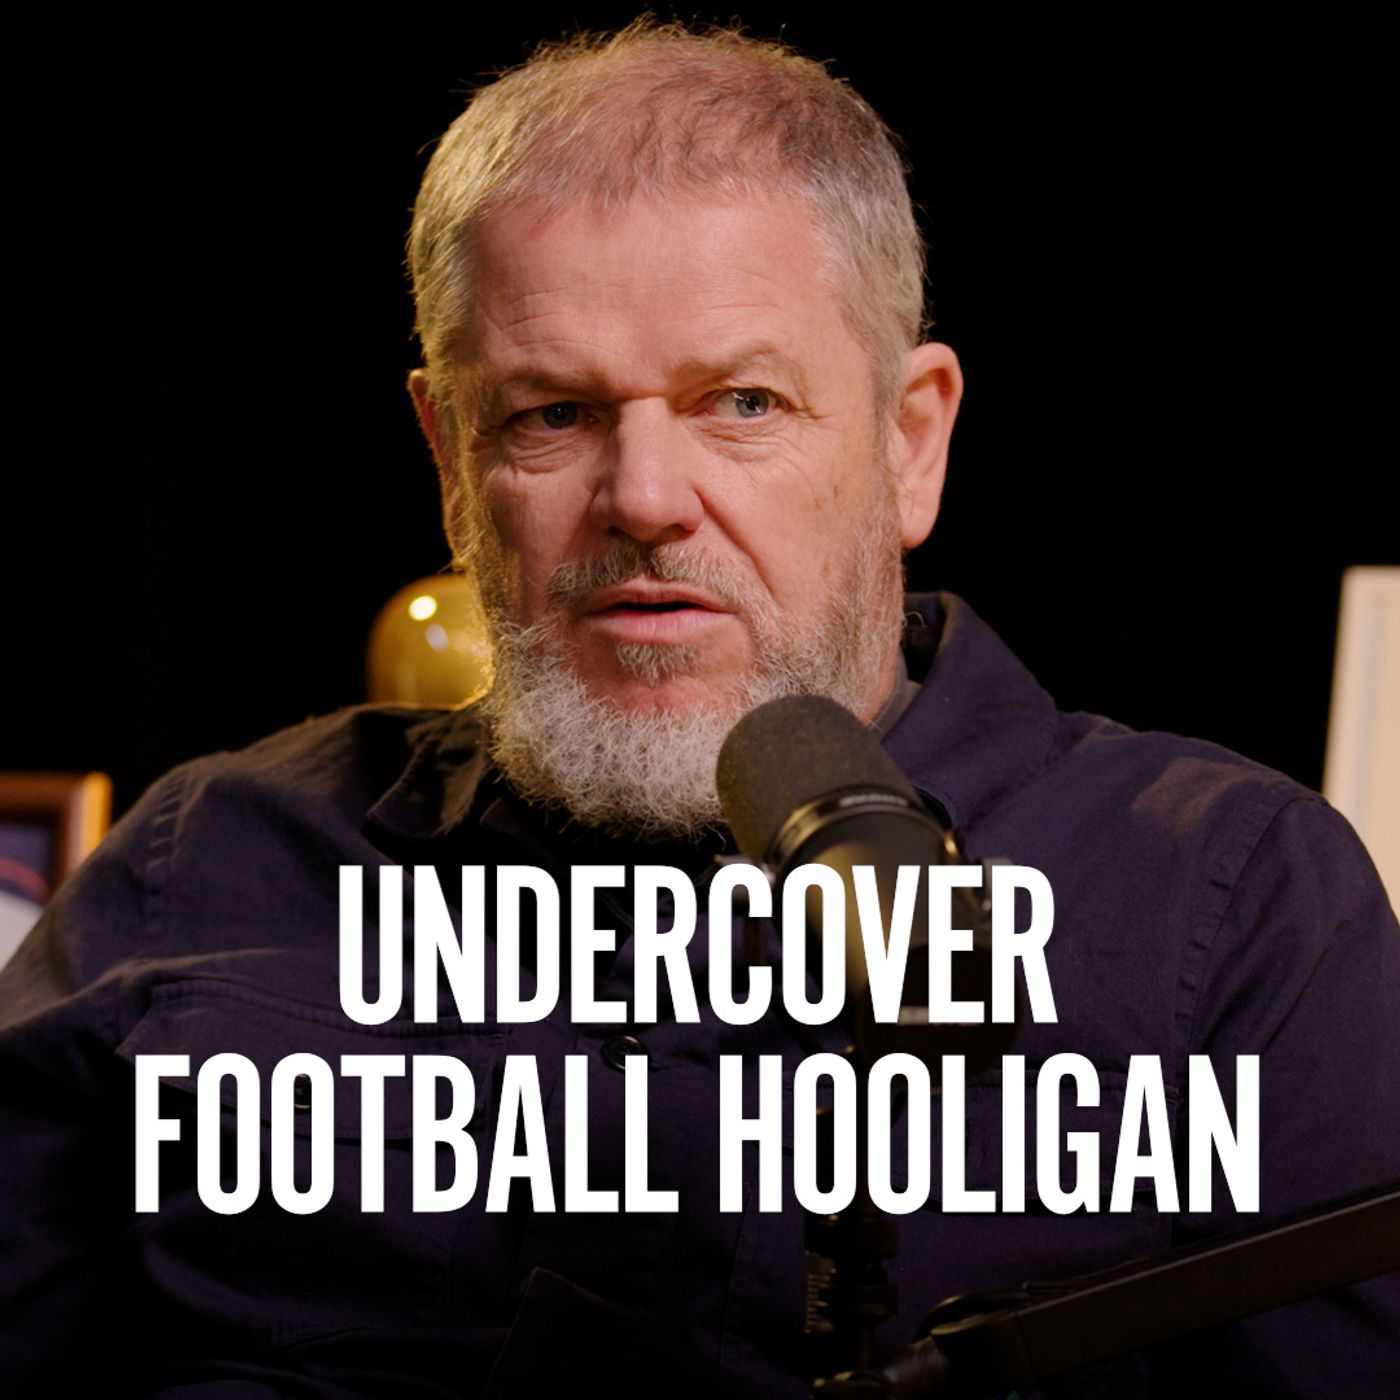 S2 Ep2: Undercover Football Hooligan: Inside England's Most Dangerous Club